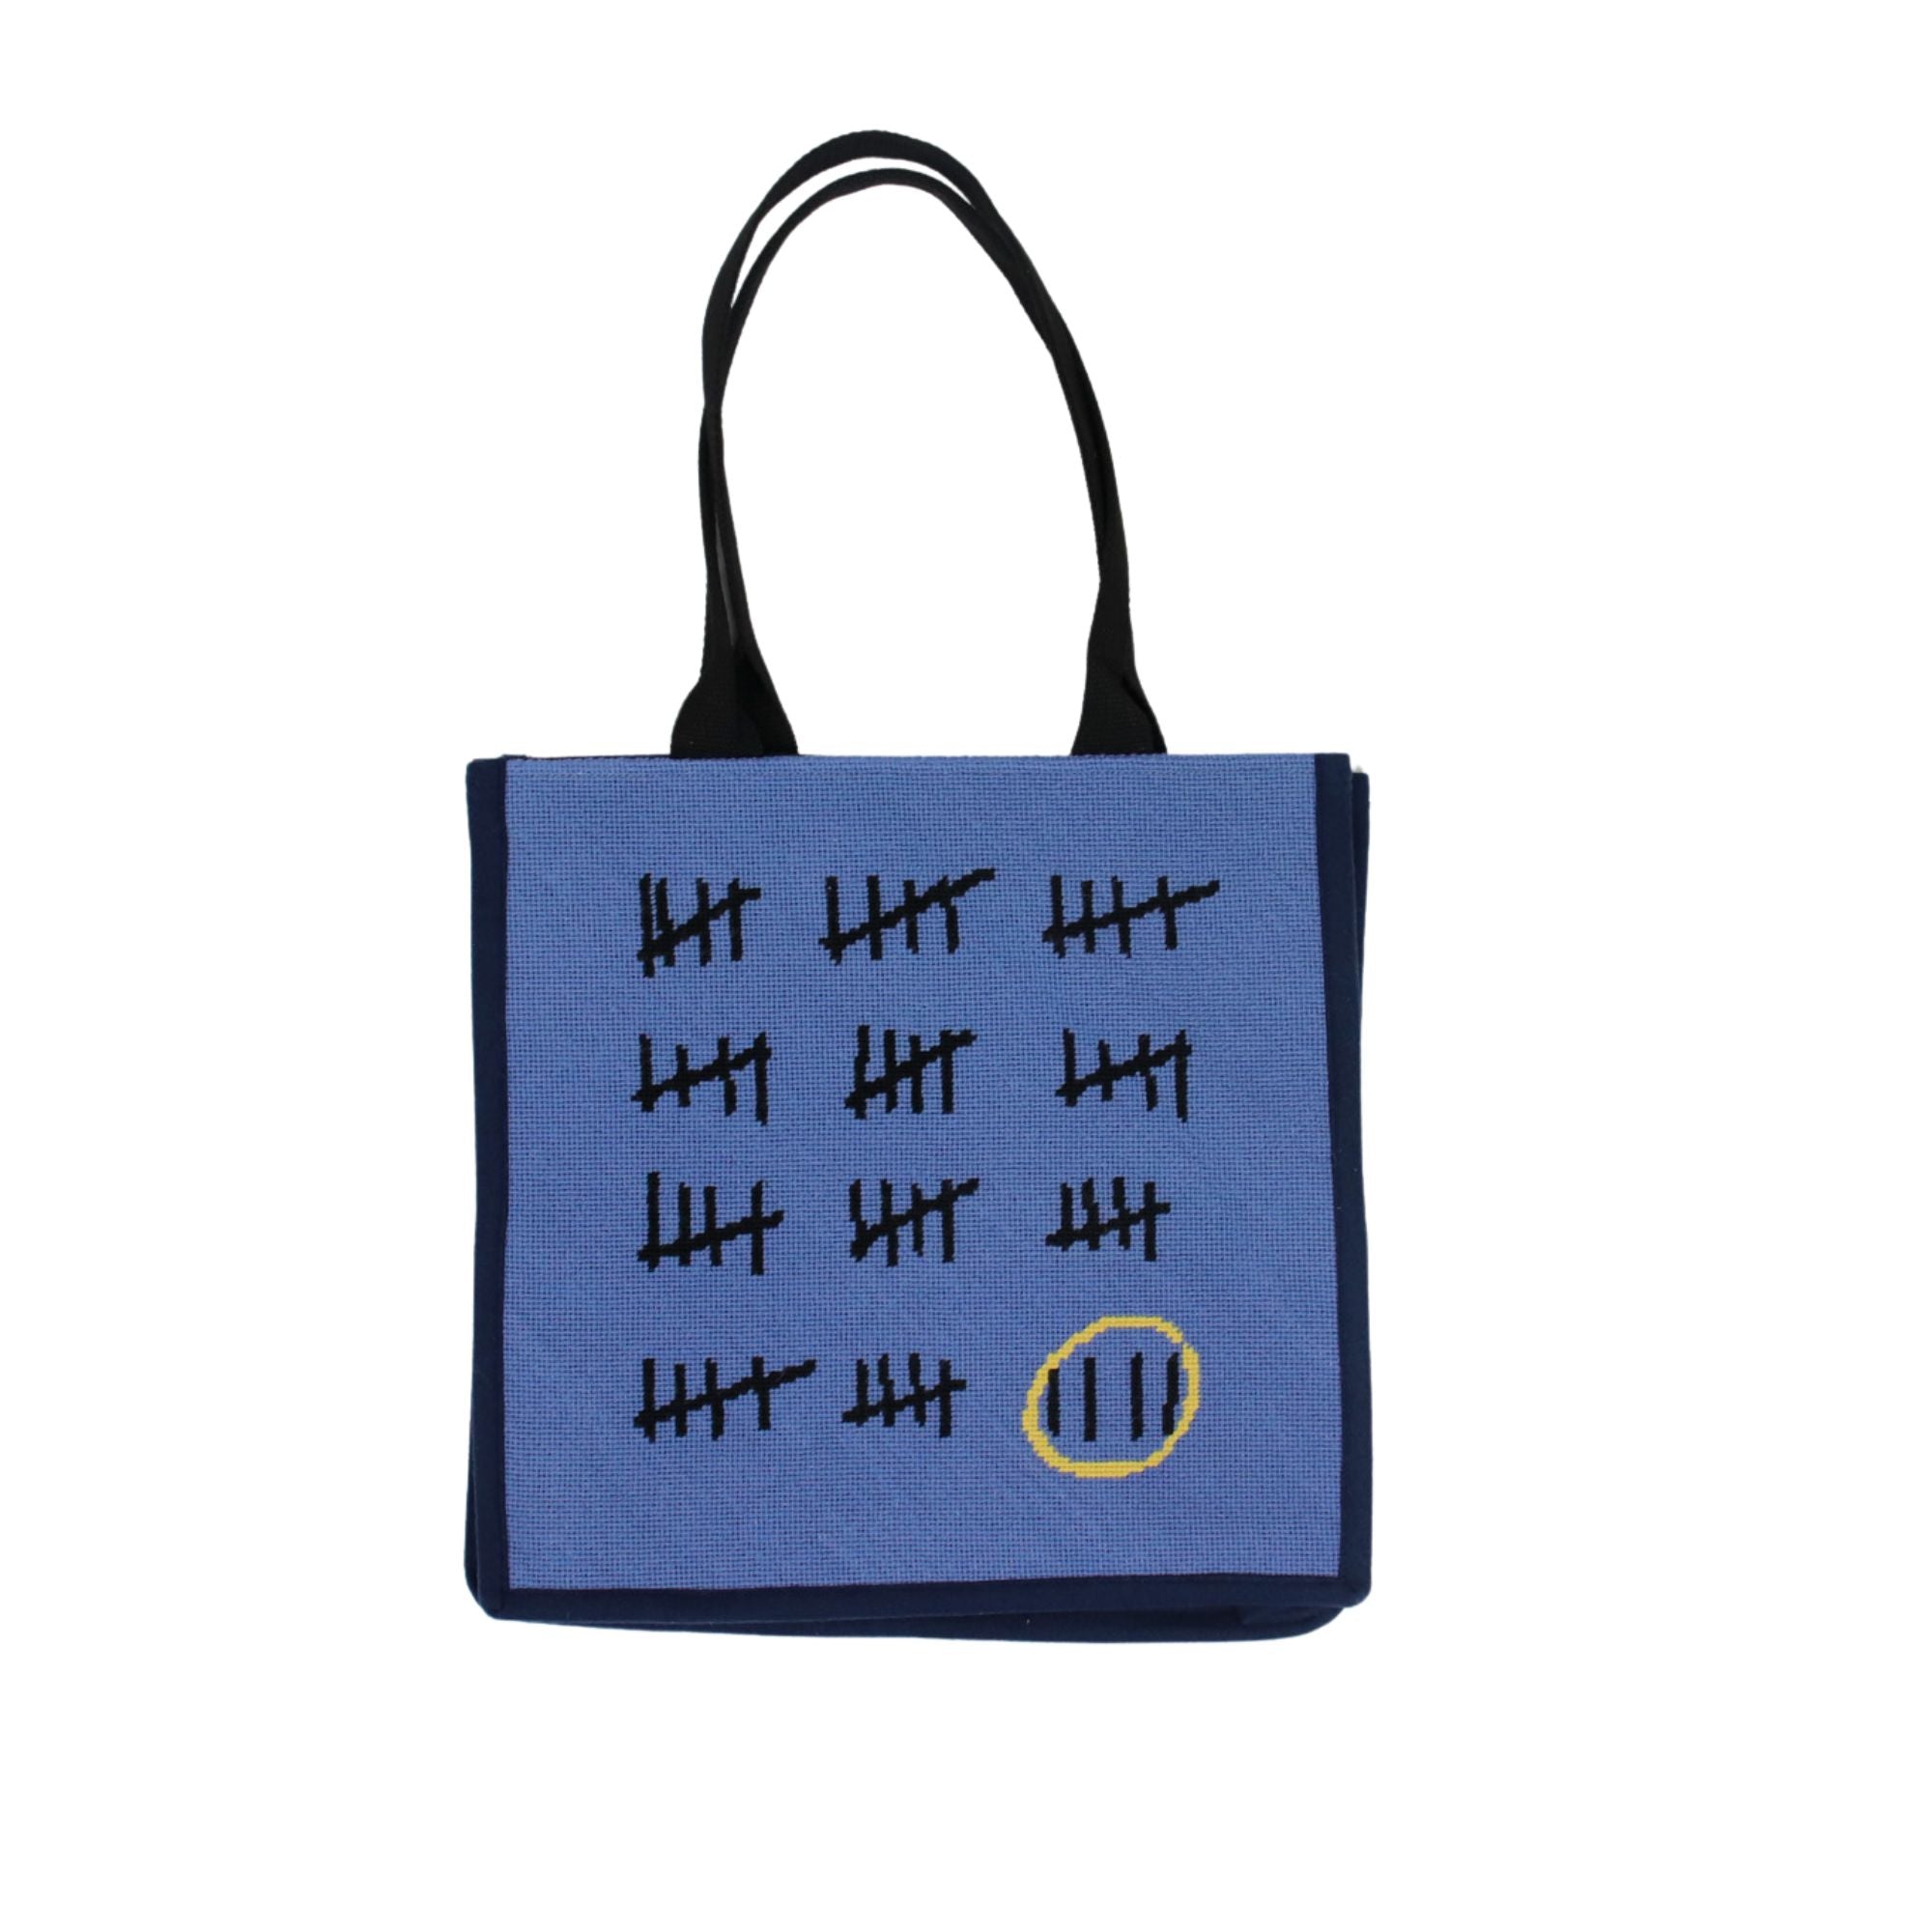 Prison Calendar Needlepoint Tote Bag by AA Gill